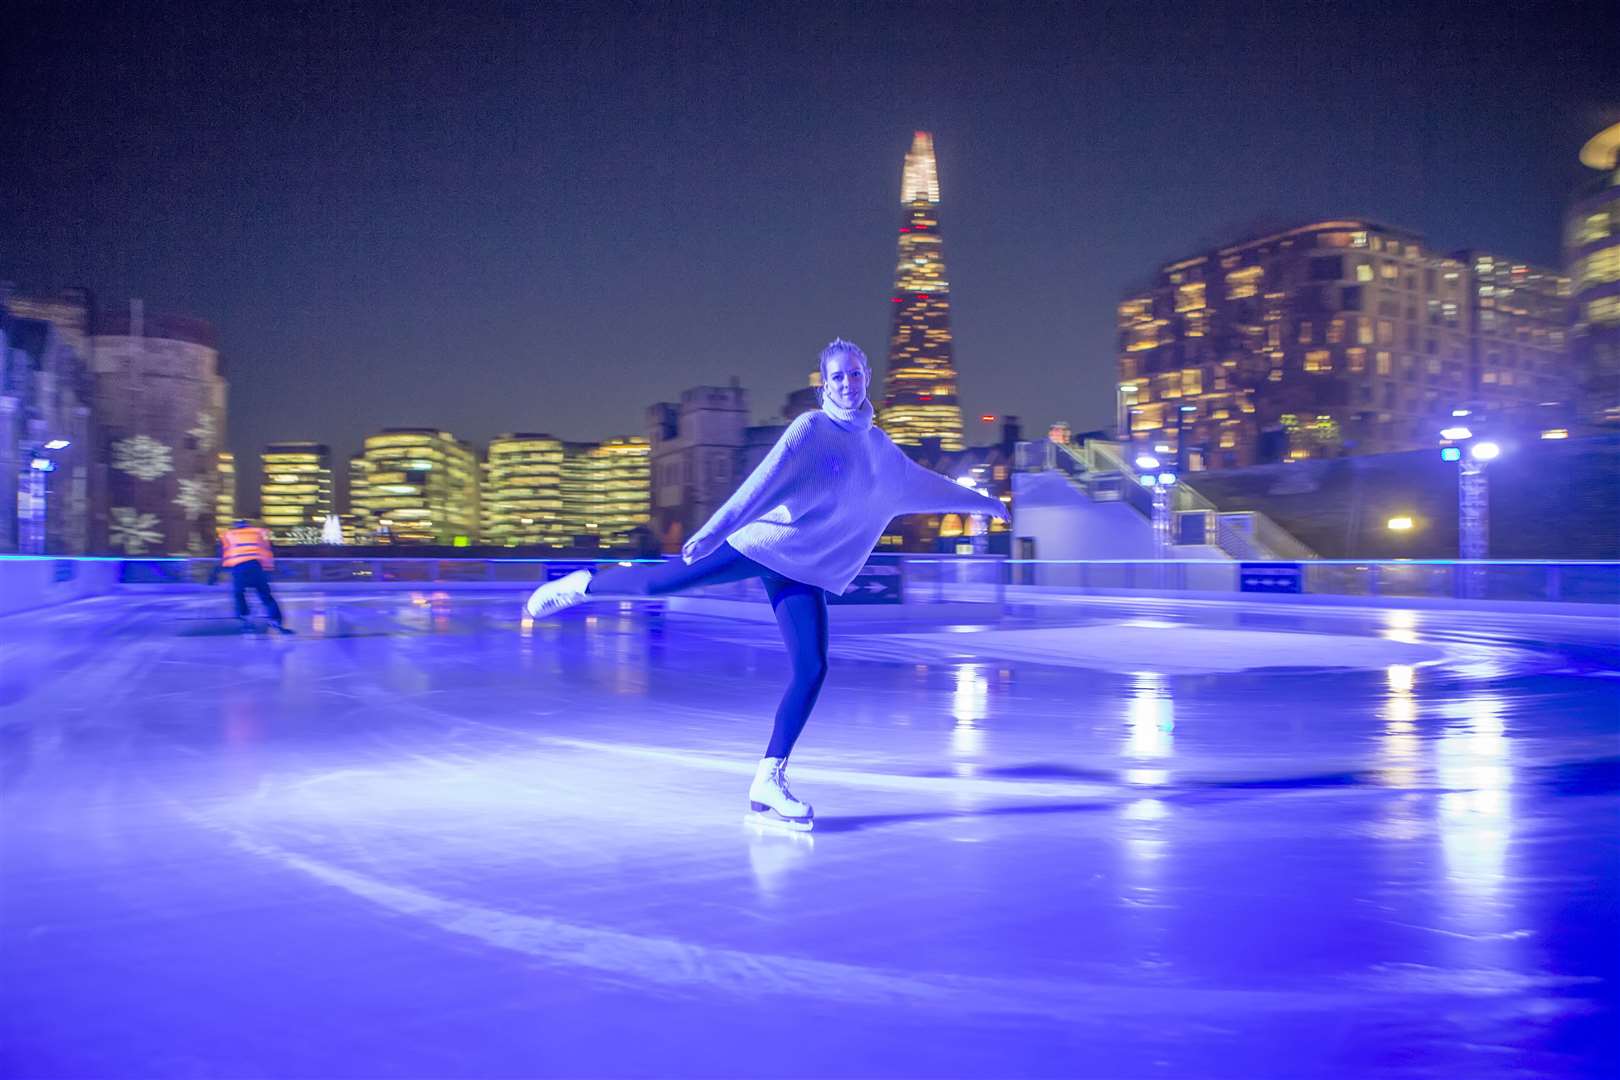 The Tower of London's ice rink is back for Christmas